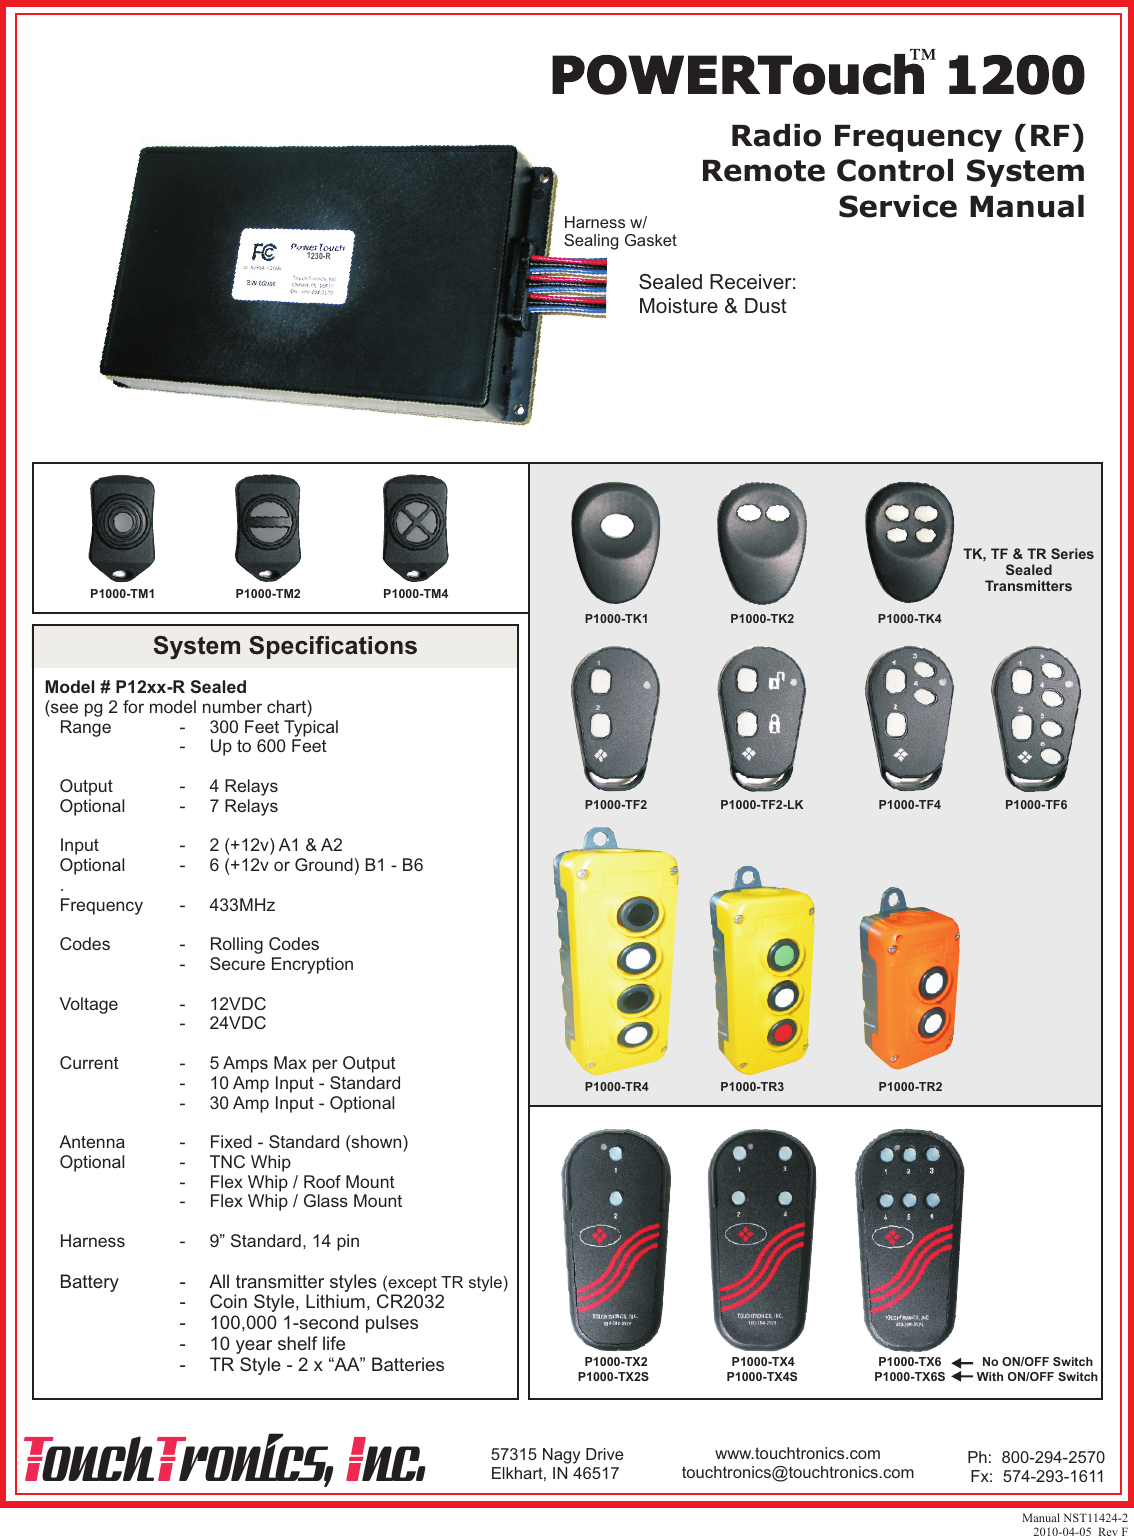 Radio Frequency (RF)Remote Control SystemService ManualPOWERTouch 1200Manual NST11424-22010-04-05  Rev F57315 Nagy DriveElkhart, IN 46517T T Iouch ronics,  nc. Ph:  800-294-2570Fx:  574-293-1611www.touchtronics.comtouchtronics@touchtronics.com1230-RHarness w/Sealing GasketSealed Receiver:Moisture &amp; DustModel # P12xx-R Sealed(see pg 2 for model number chart)   Range              -     300 Feet Typical                           -     Up to 600 Feet      Output             -     4 Relays   Optional           -     7 Relays      Input                -     2 (+12v) A1 &amp; A2   Optional           -     6 (+12v or Ground) B1 - B6   .   Frequency       -     433MHz   Codes              -     Rolling Codes                           -     Secure Encryption   Voltage            -     12VDC                           -     24VDC      Current            -     5 Amps Max per Output                           -     10 Amp Input - Standard                           -     30 Amp Input - Optional      Antenna           -     Fixed - Standard (shown)   Optional           -     TNC Whip                           -     Flex Whip / Roof Mount                           -     Flex Whip / Glass Mount      Harness           -     9” Standard, 14 pin   Battery            -     All transmitter styles (except TR style)                          -     Coin Style, Lithium, CR2032                          -     100,000 1-second pulses                          -     10 year shelf life                          -     TR Style - 2 x “AA” BatteriesSystem SpecificationsP1000-TM1 P1000-TM2 P1000-TM4P1000-TK1 P1000-TK2 P1000-TK4P1000-TF2 P1000-TF2-LK P1000-TF4P1000-TX2 P1000-TX4 P1000-TX6P1000-TX2S P1000-TX4S P1000-TX6SNo ON/OFF SwitchWith ON/OFF SwitchP1000-TF6TK, TF &amp; TR SeriesSealedTransmittersP1000-TR4 P1000-TR3 P1000-TR2